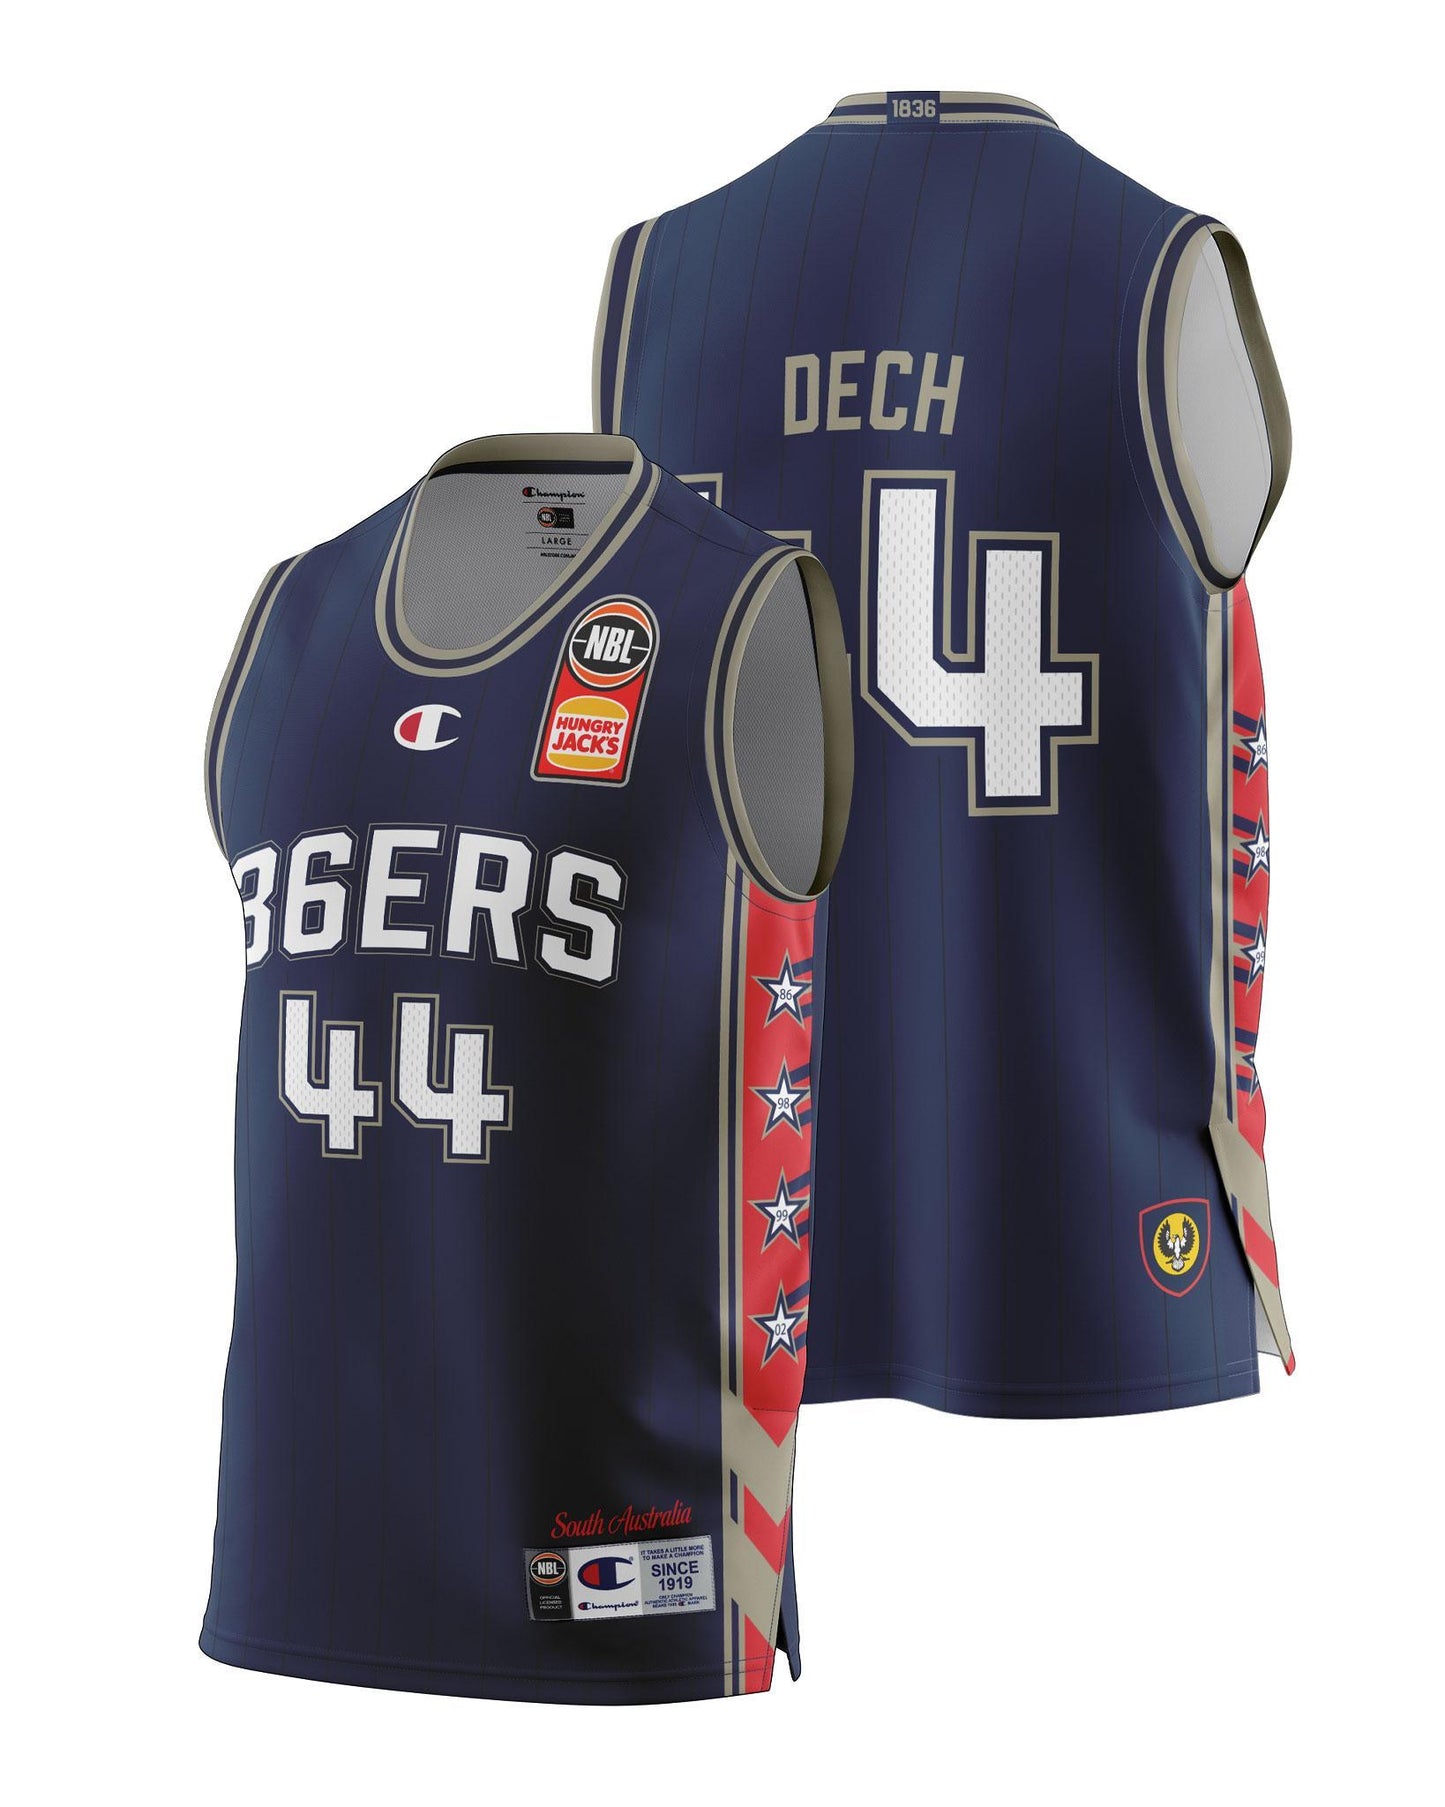 Adelaide 36ers 2021/22 Authentic Home Youth Jersey - Sunday Dech